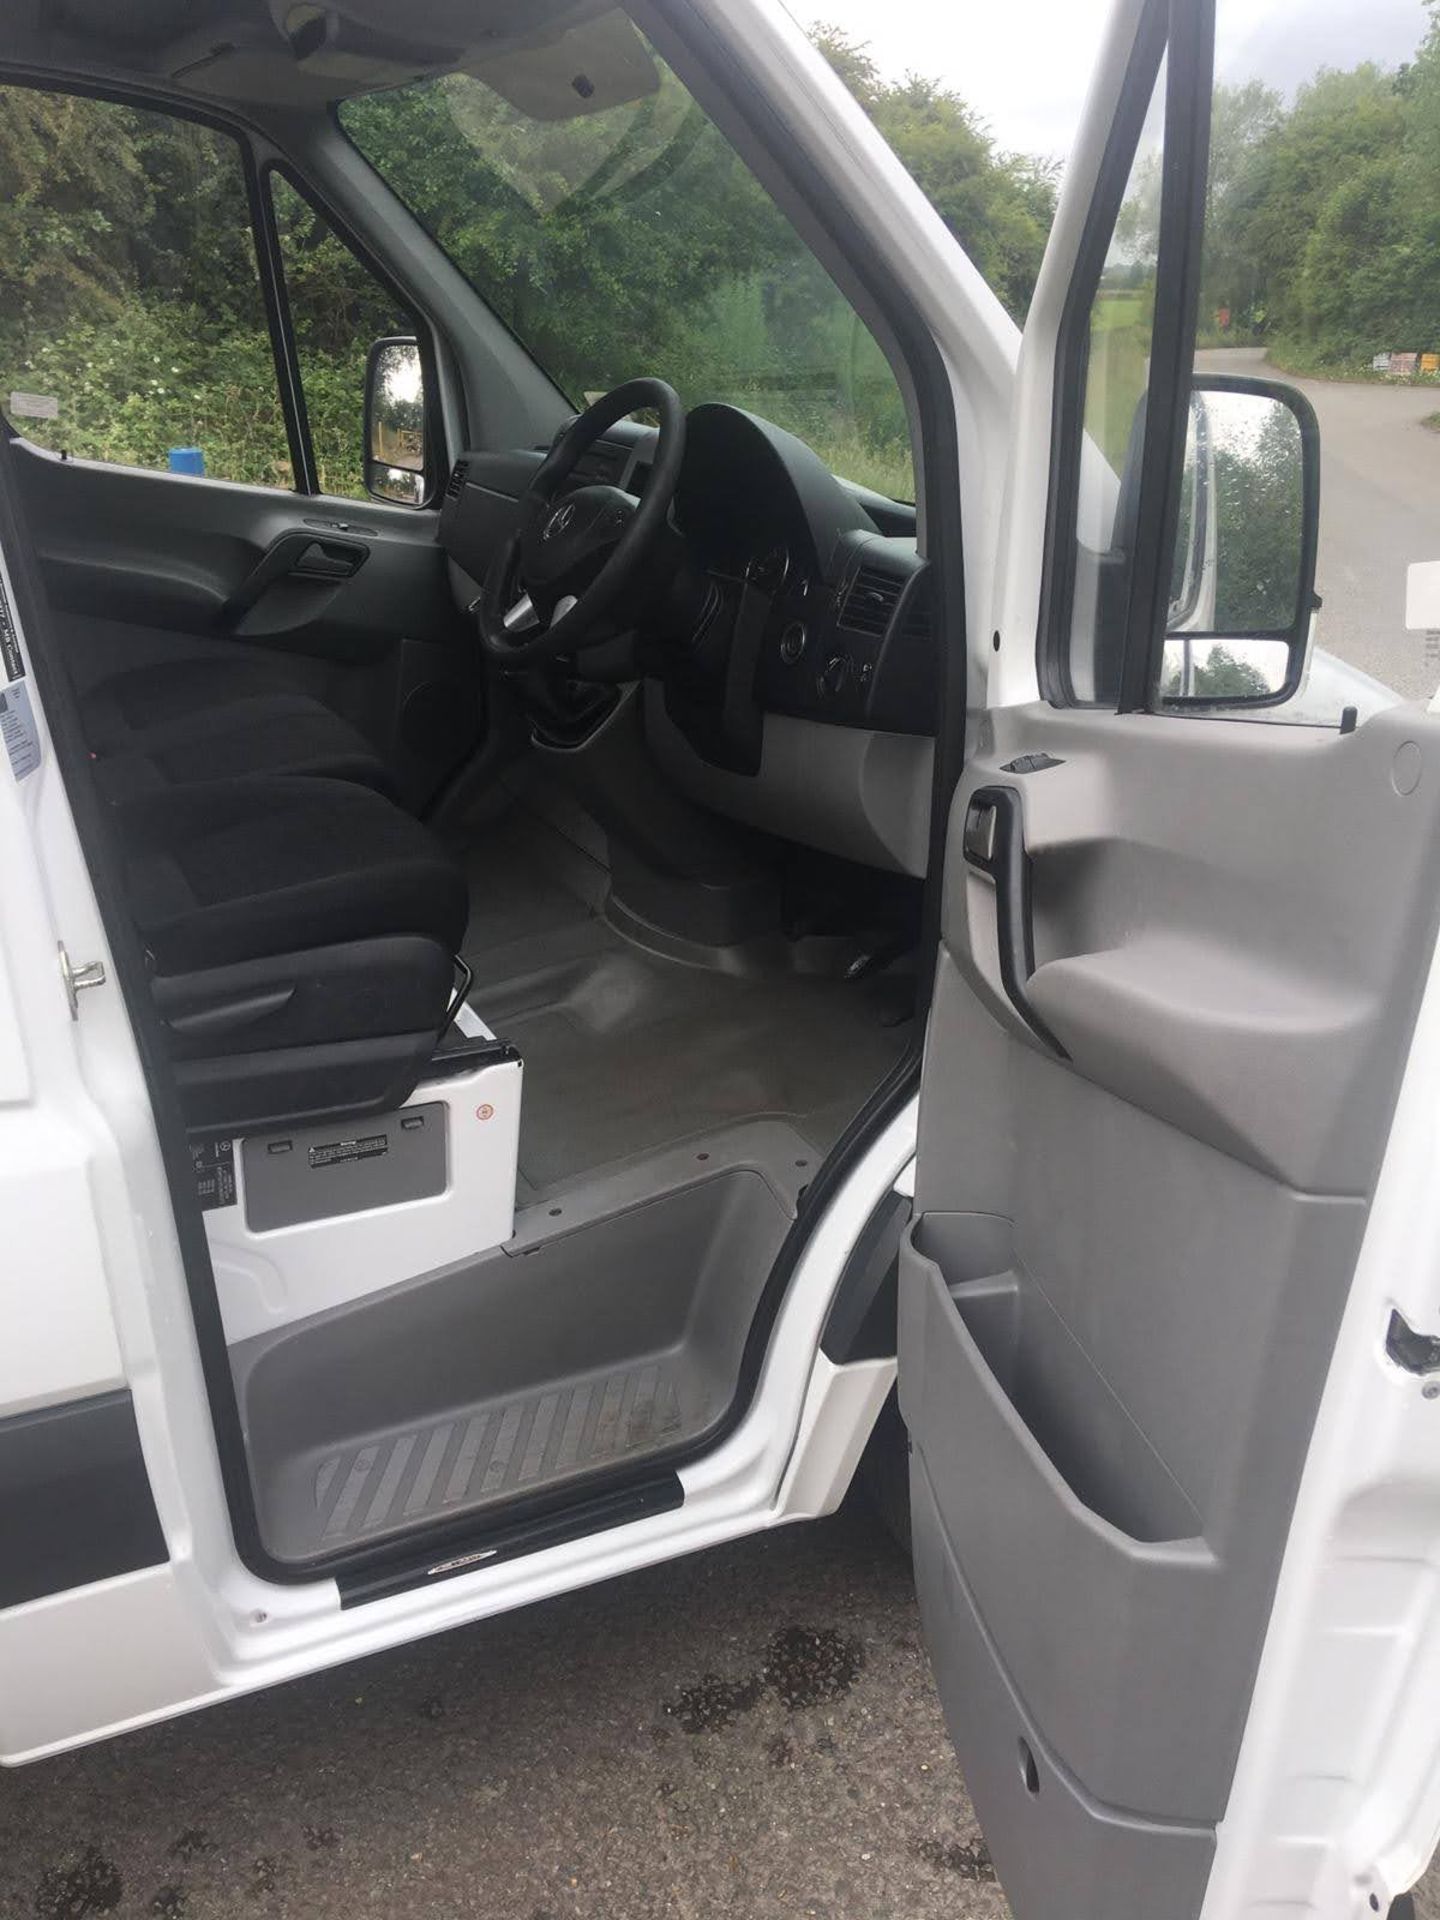 VERY RARE! 2013/13 REG MERCEDES-BENZ SPRINTER 519 CDI 3.0 DIESEL WHITE RECOVERY, (BMW NOT INCLUDED) - Image 15 of 25